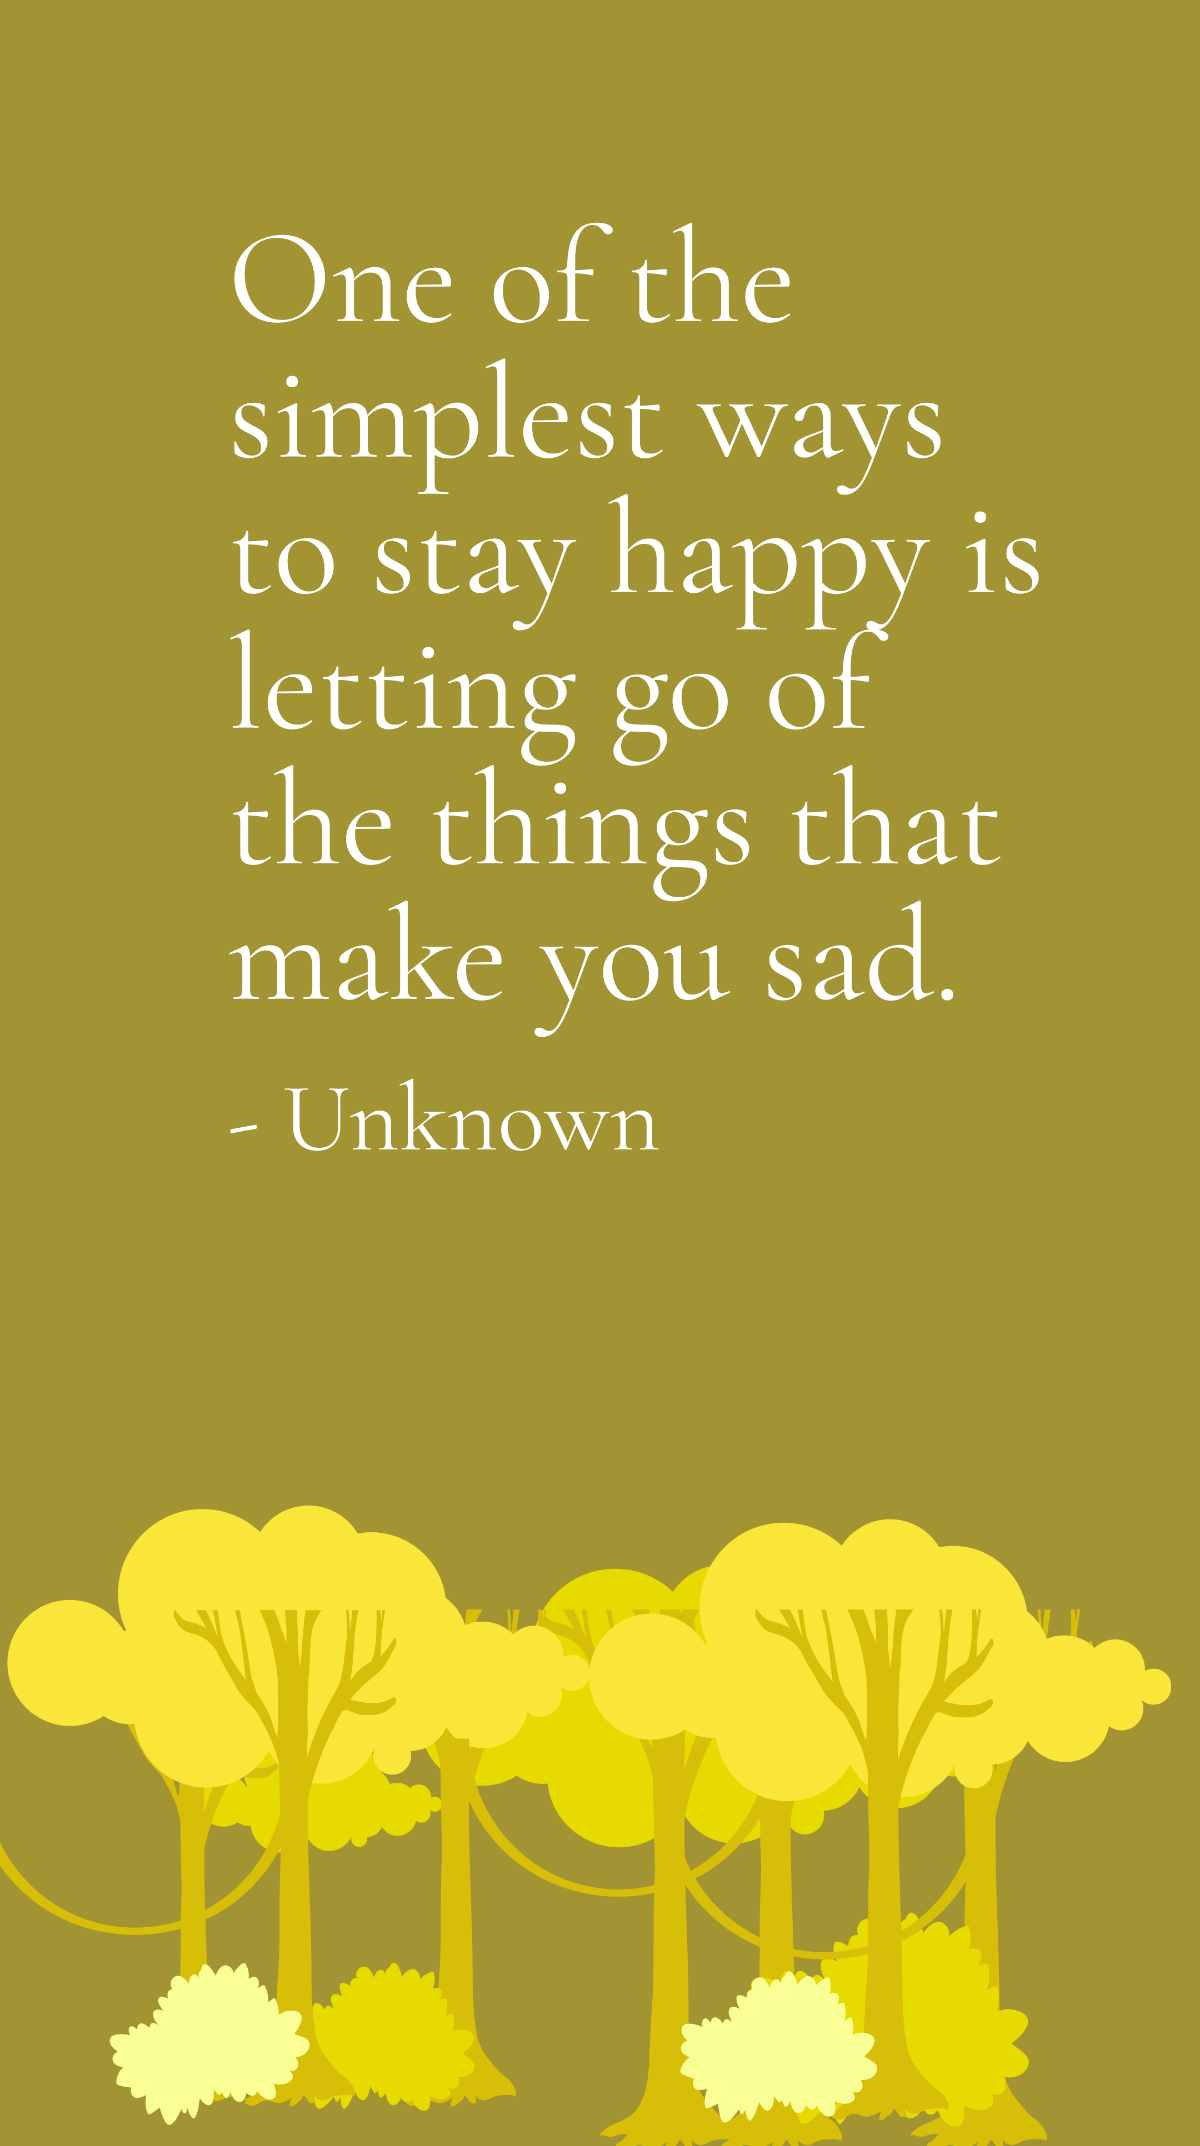 Unknown - One of the simplest ways to stay happy is letting go of the things that make you sad. Template